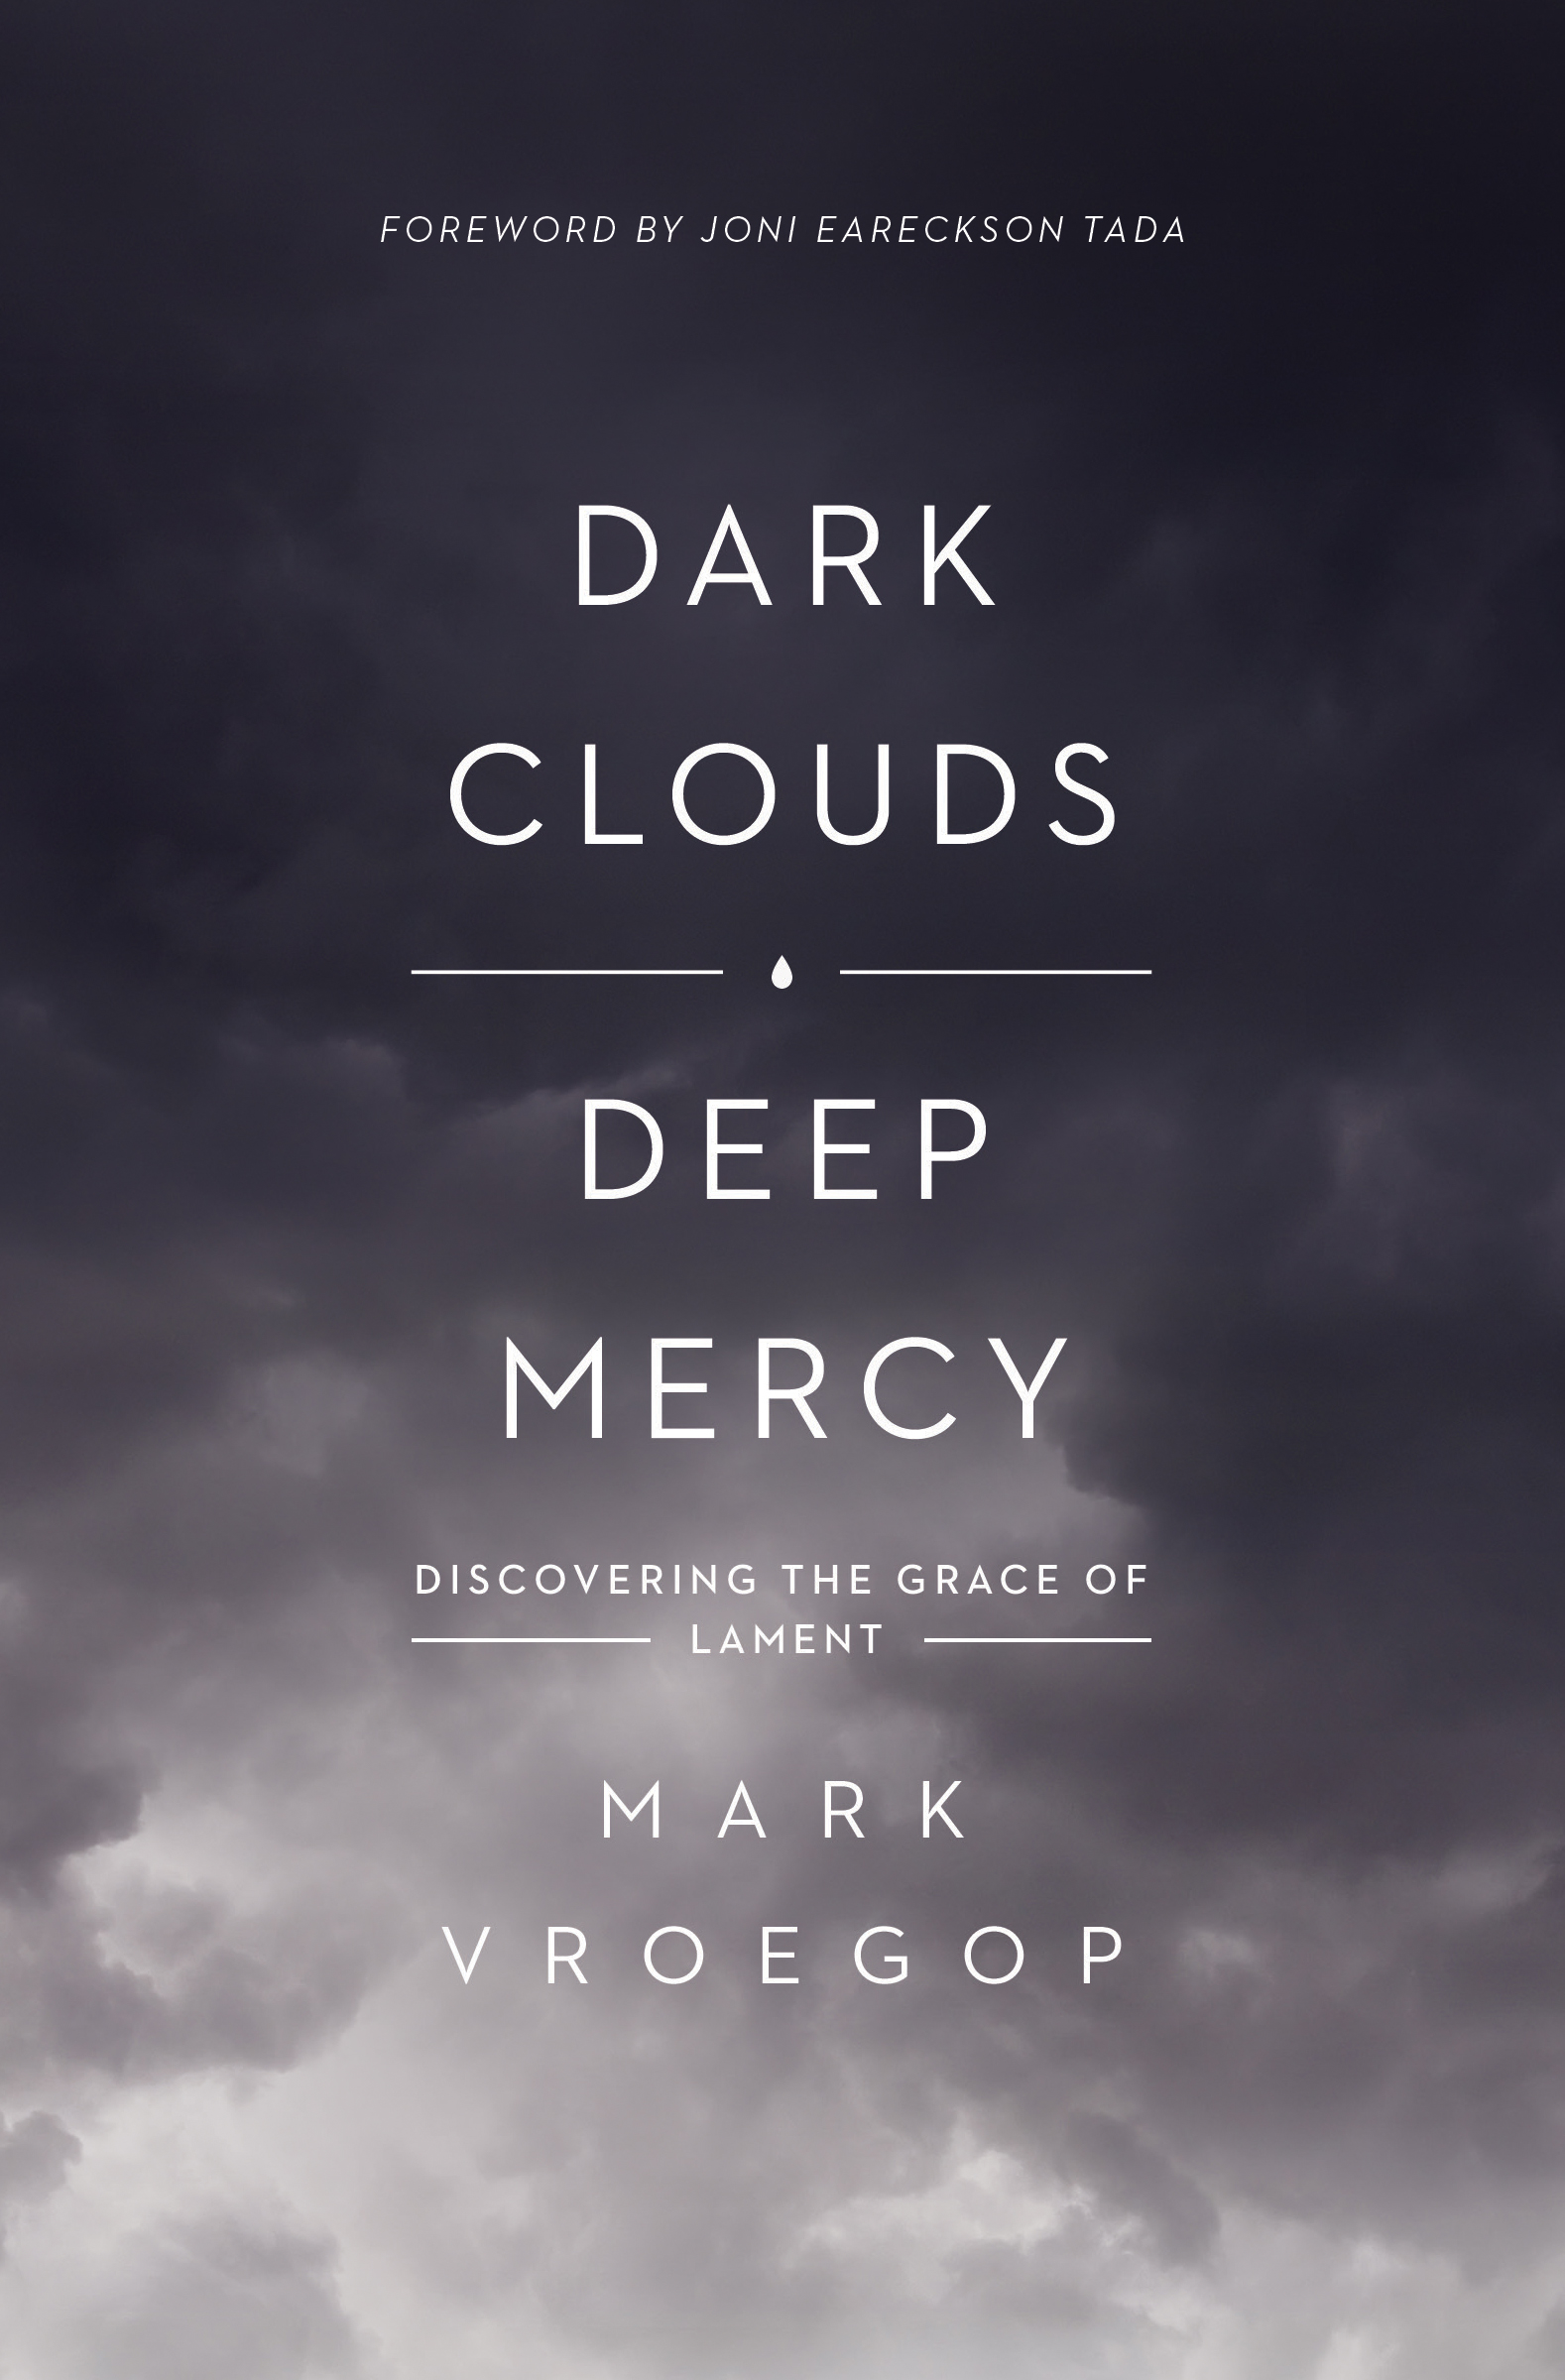 Dark Clouds, Deep Mercy - Discovering the Grace of Lament